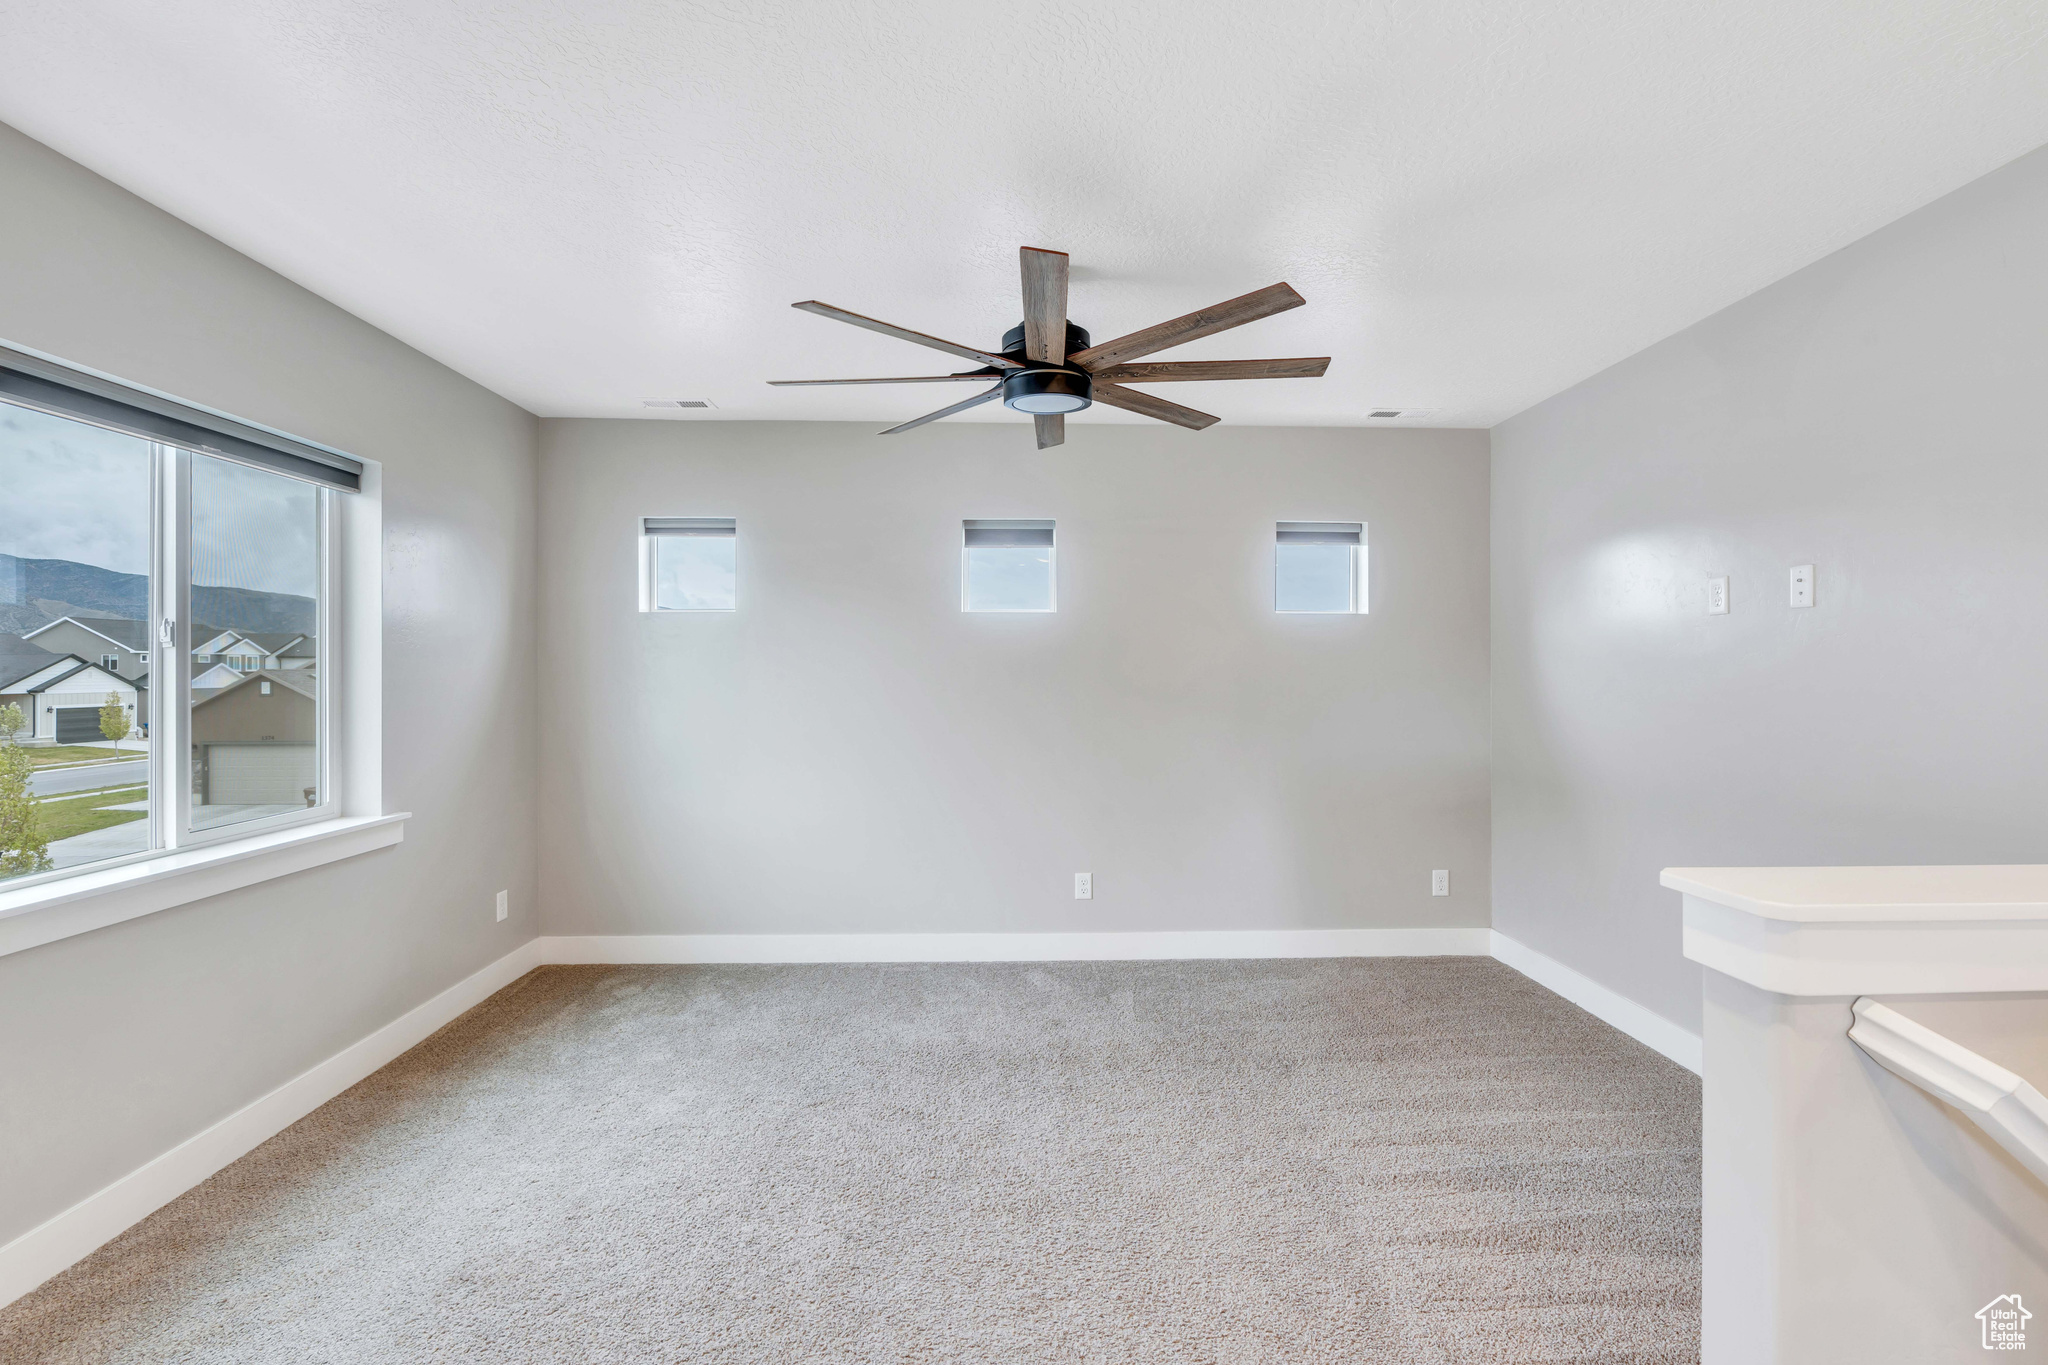 Carpeted loft featuring a wealth of natural light and ceiling fan